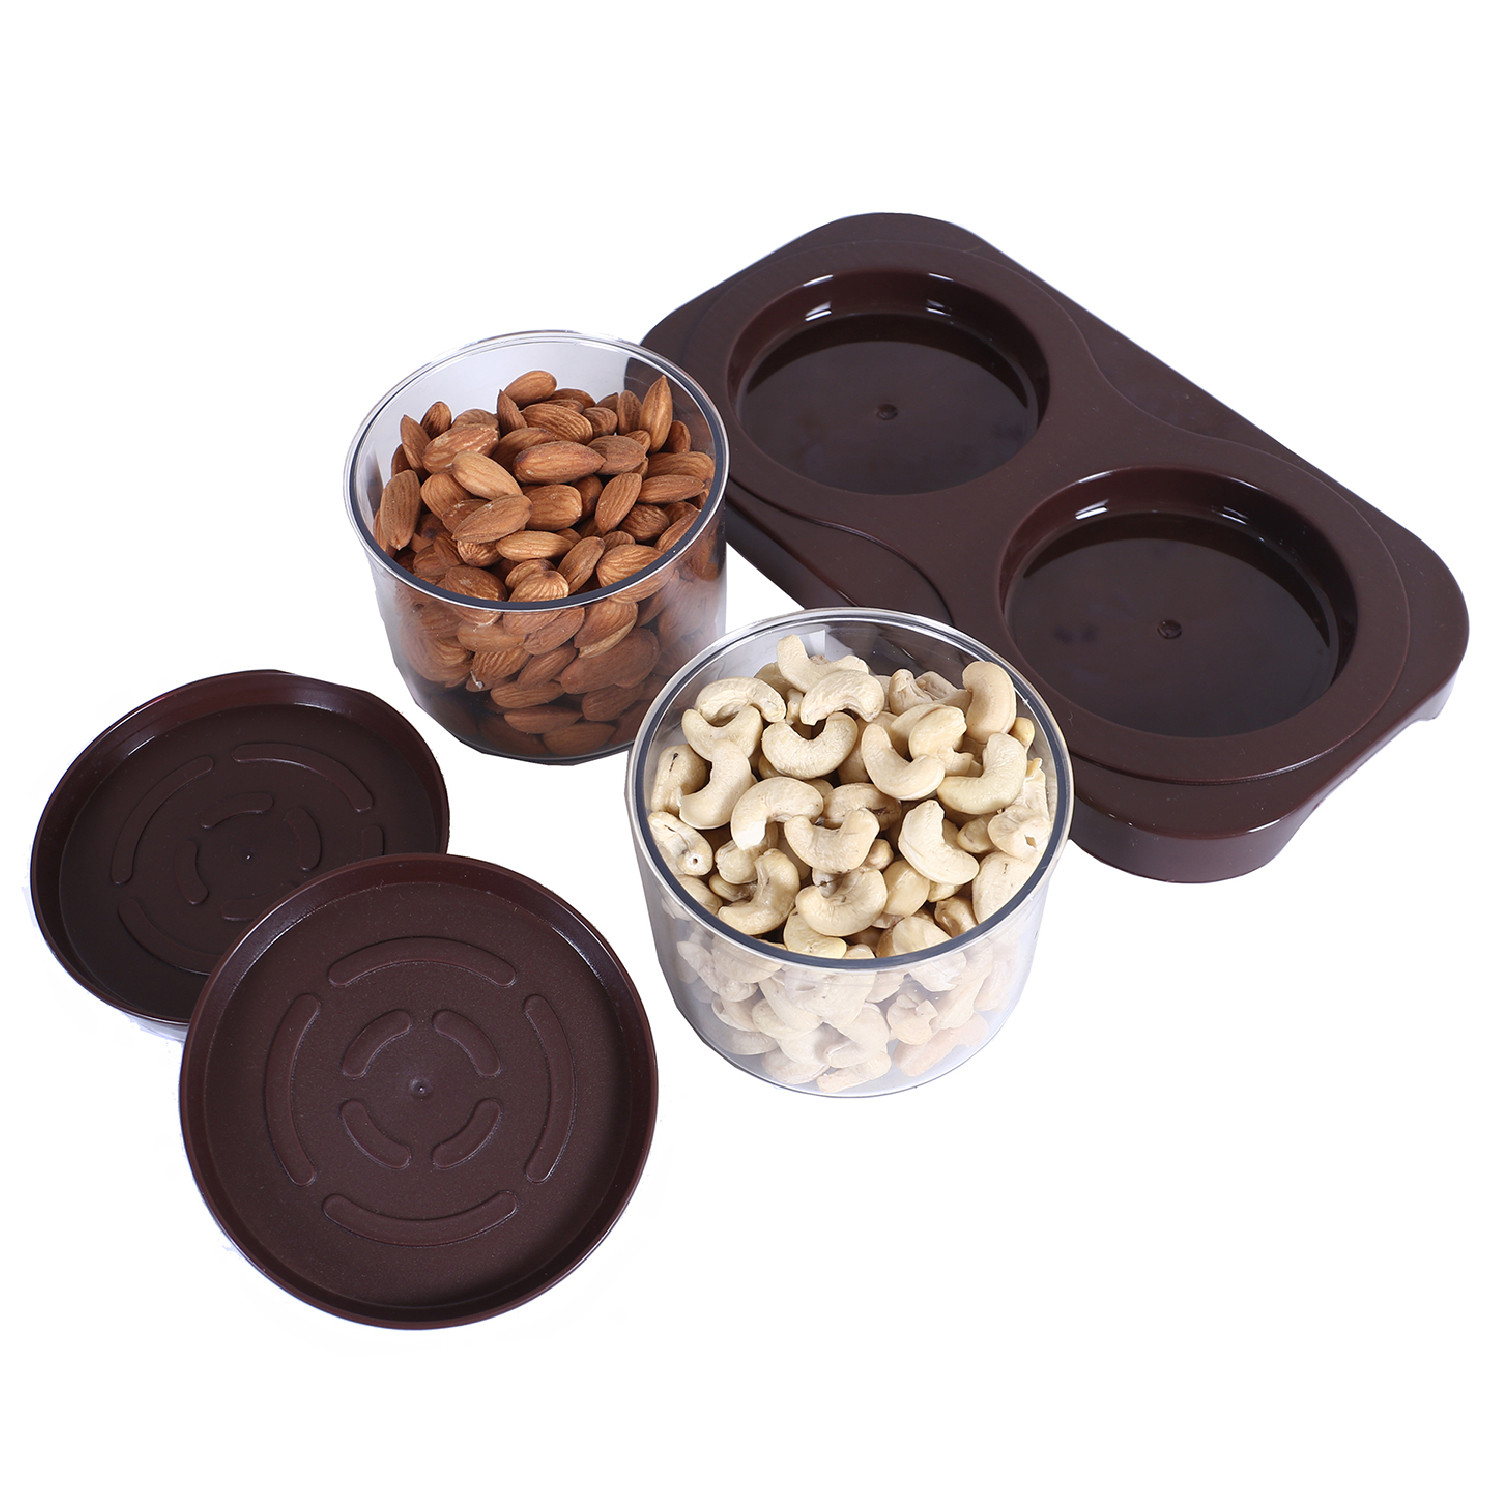 Kuber Industries 2 Containers & Tray Set|Unbreakable Plastic Snackers,Cookies,Nuts Serving Tray|Airtight Containers with Lid,350 ml (Brown)